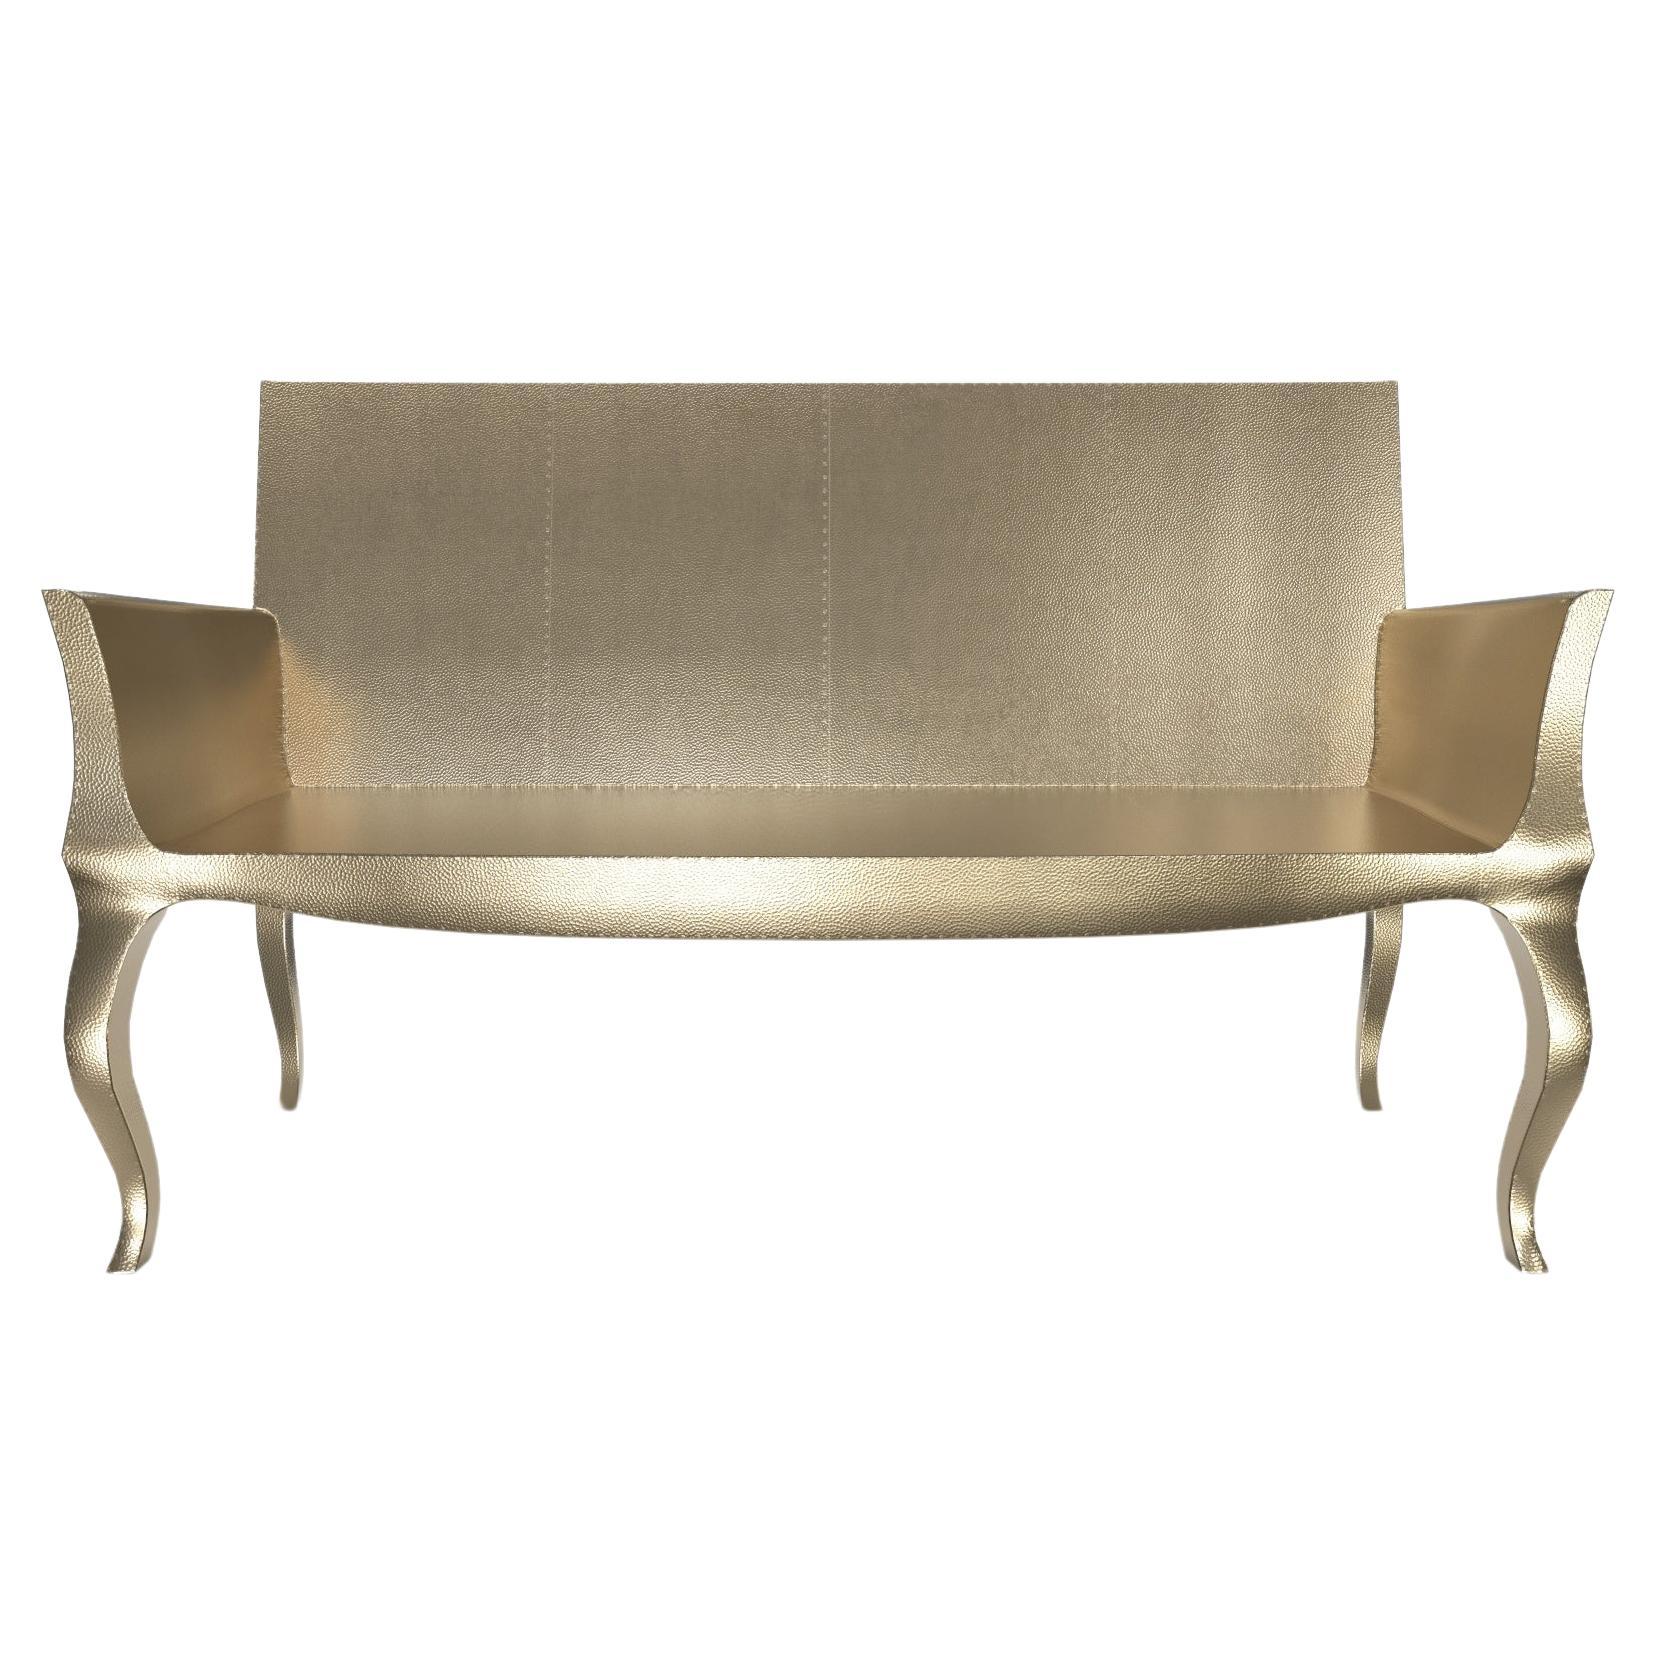 Louise Settee Art Deco Settees in Mid. Hammered Brass by Paul Mathieu For Sale